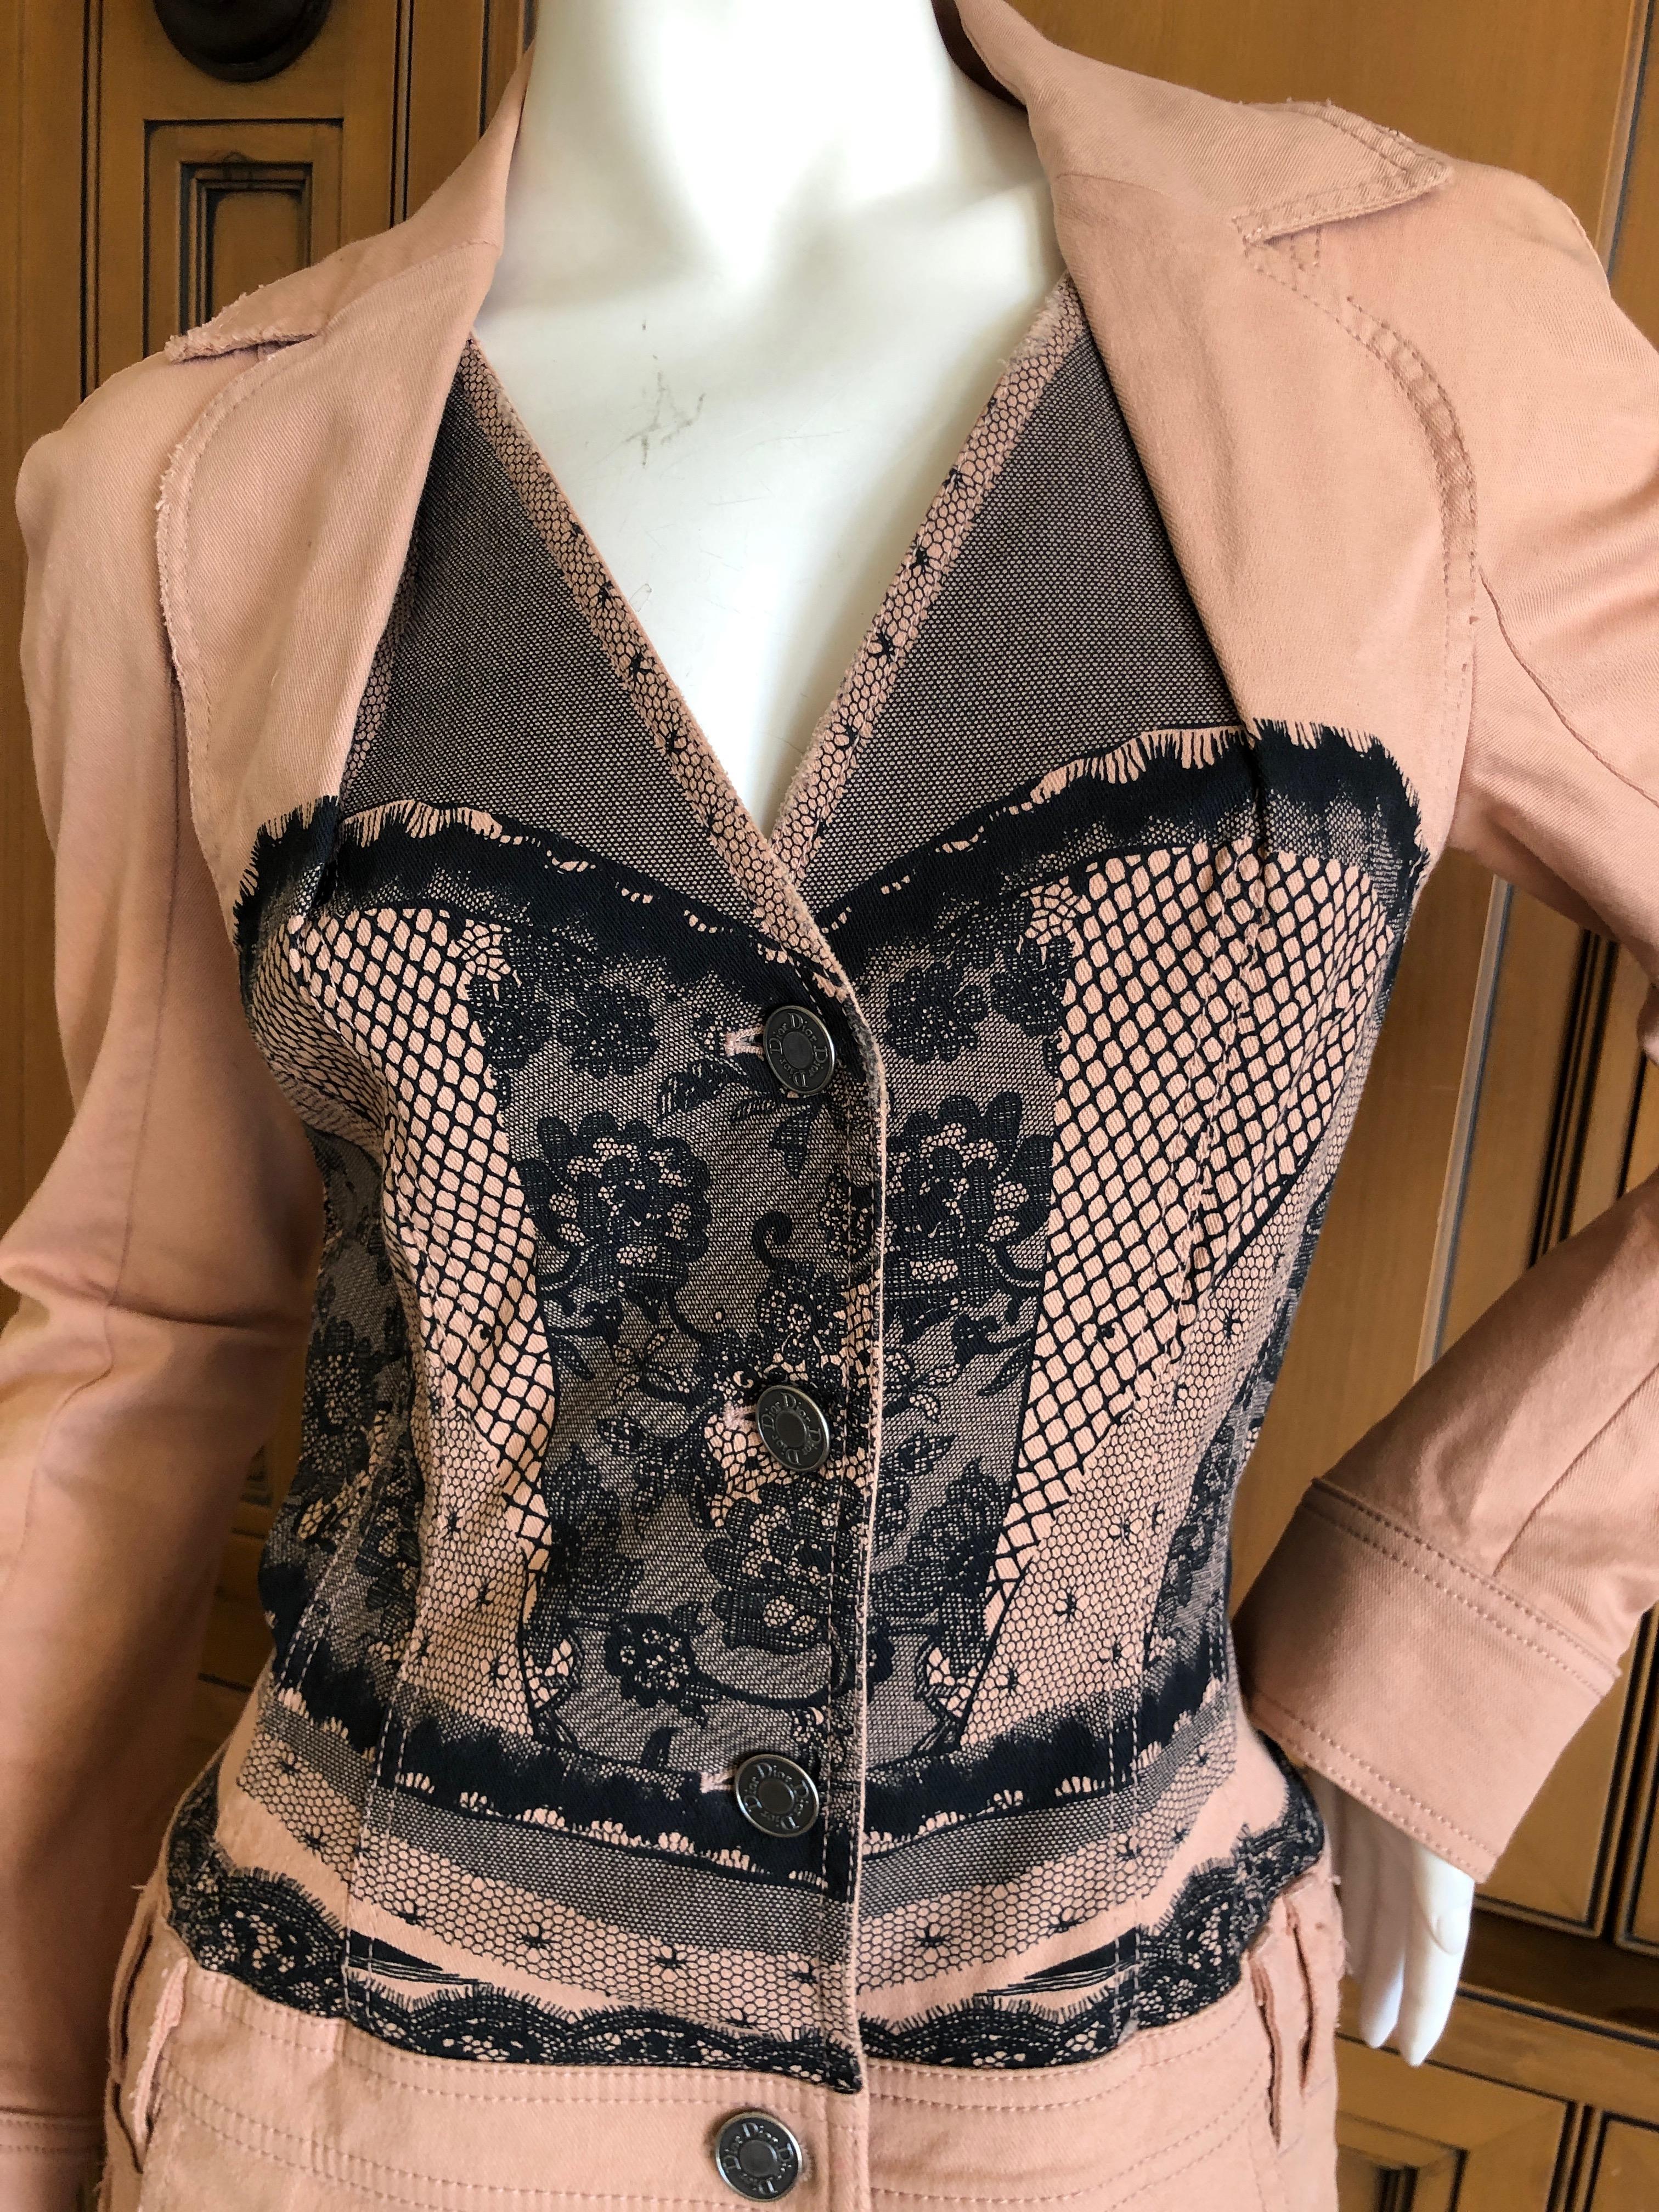 Christian Dior by John Galliano Tromp l'oeil Lace Accented Cotton Bar Coat.
Cotton denim with tromp l'oeil (faux) lace accents
 Size 38
Bust 36